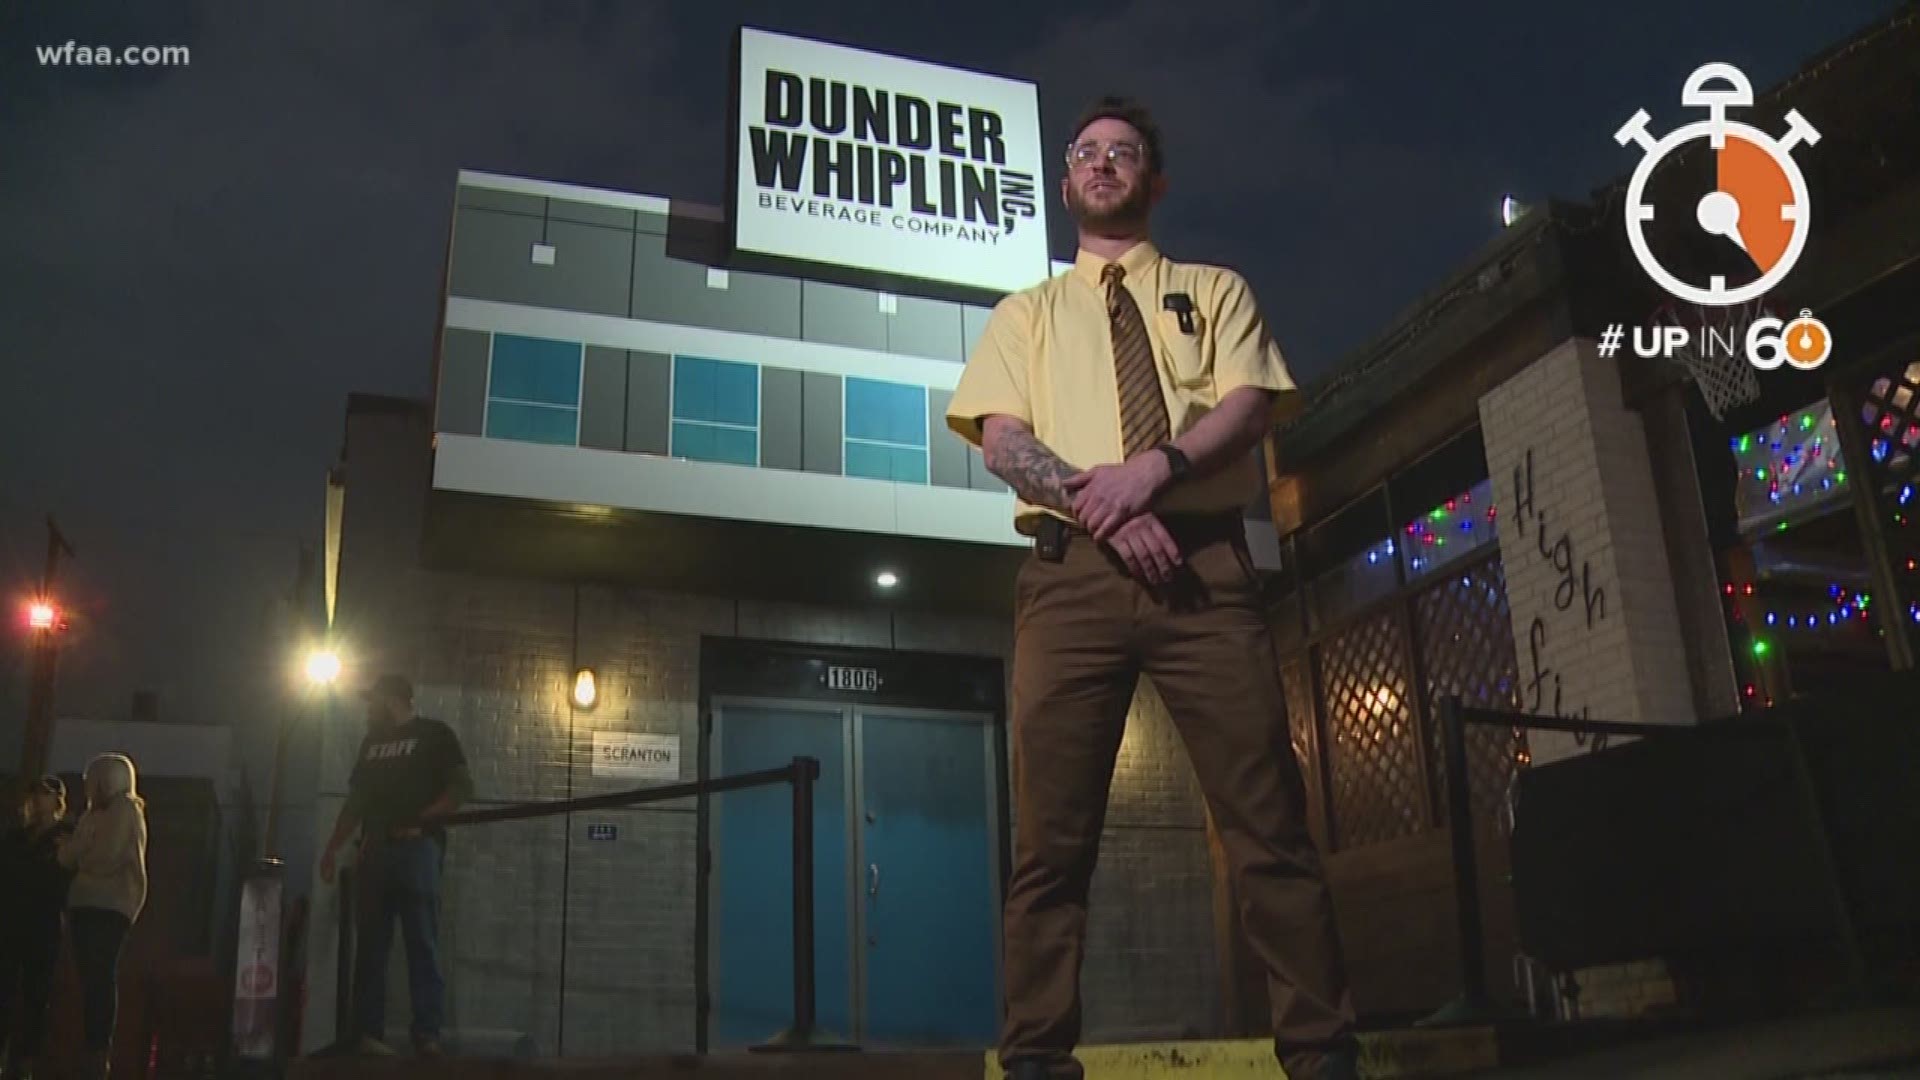 The Whippersnapper has transformed into Dunder Whiplin, Inc., an 'Office'-themed pop-up bar.